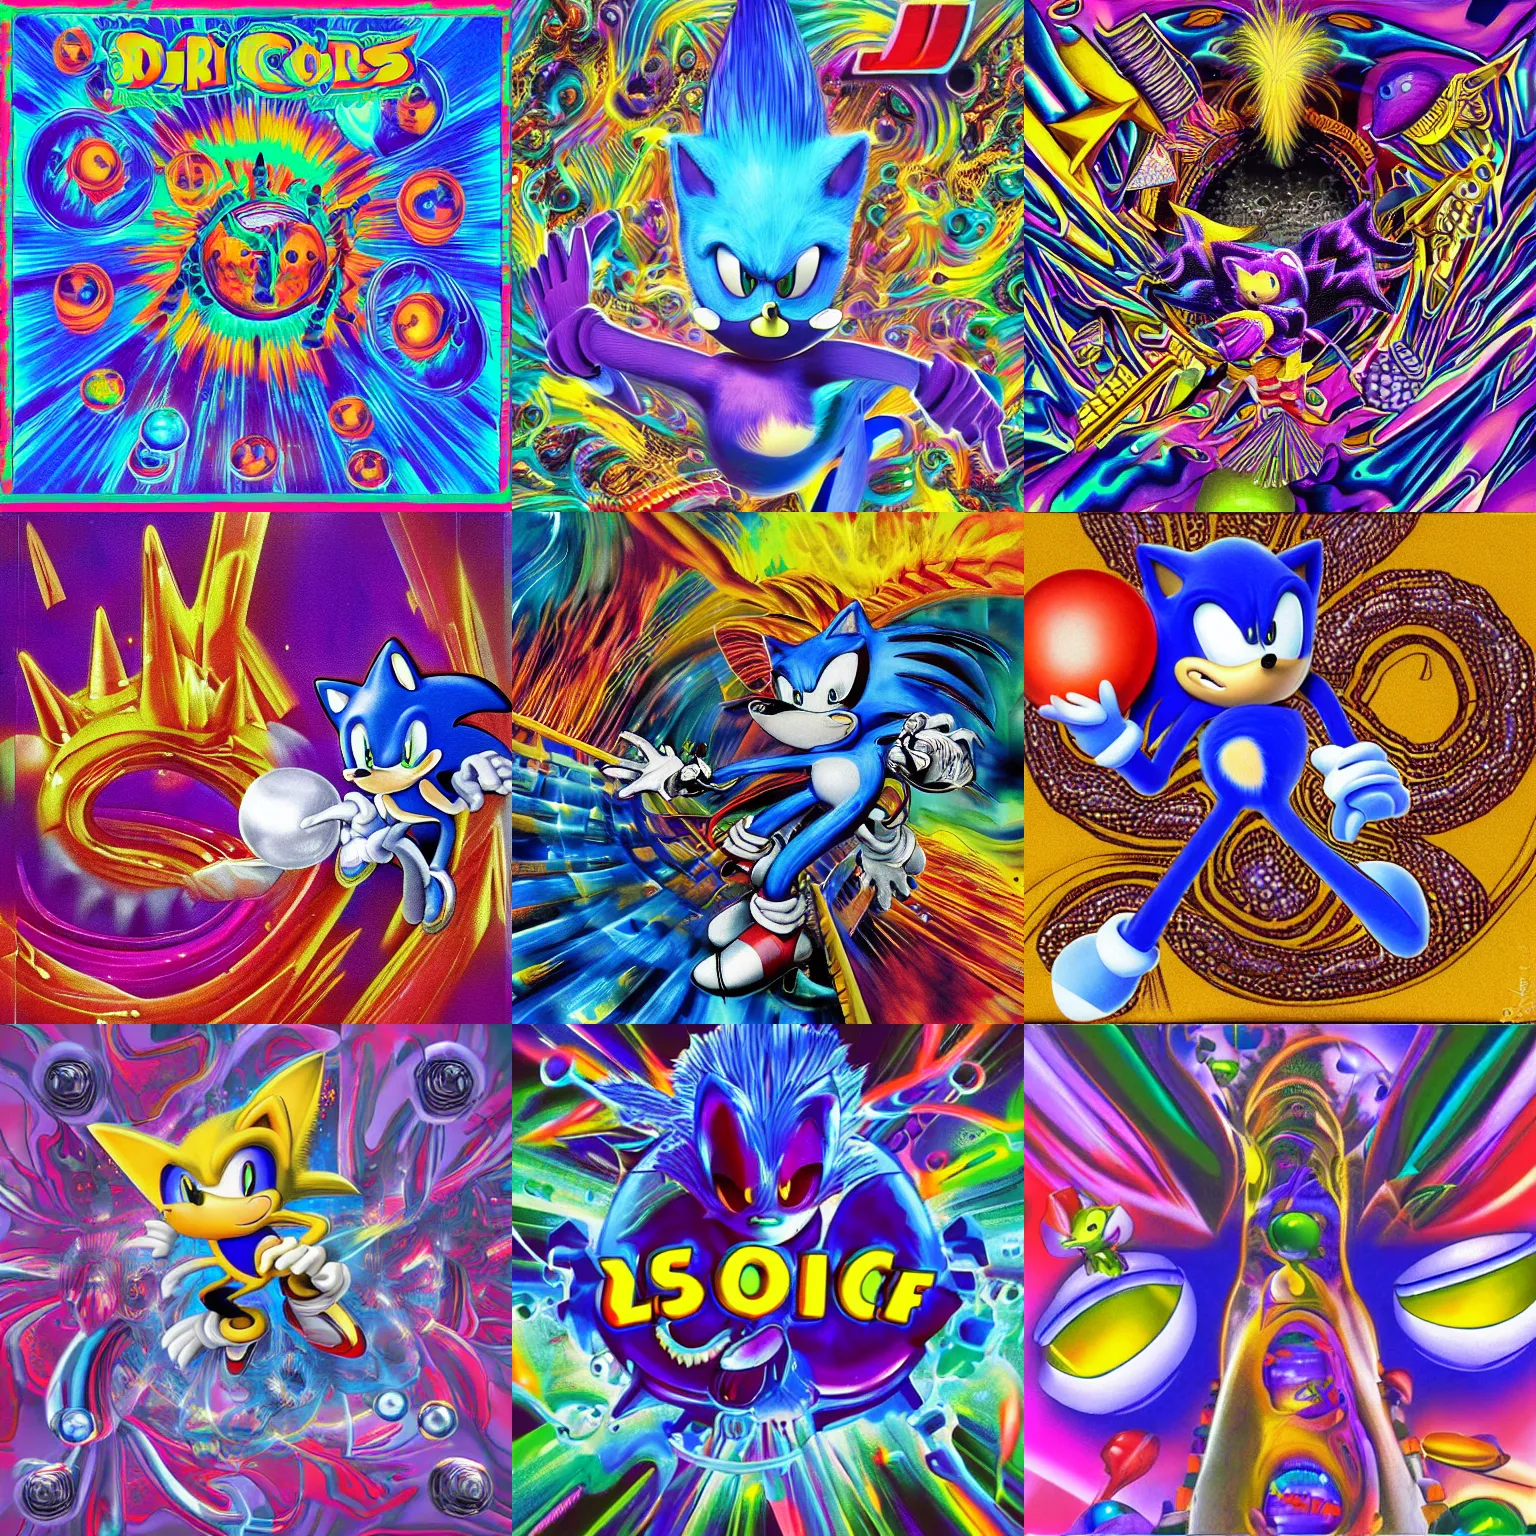 Prompt: surreal, sharp, detailed professional, sonic high quality airbrush art mgmt album cover of a liquid dissolving lsd dmt blue sonic the hedgehog with spheres, cones, springs, purple checkerboard background, 1 9 9 0 s 1 9 9 2 sega genesis video game album cover